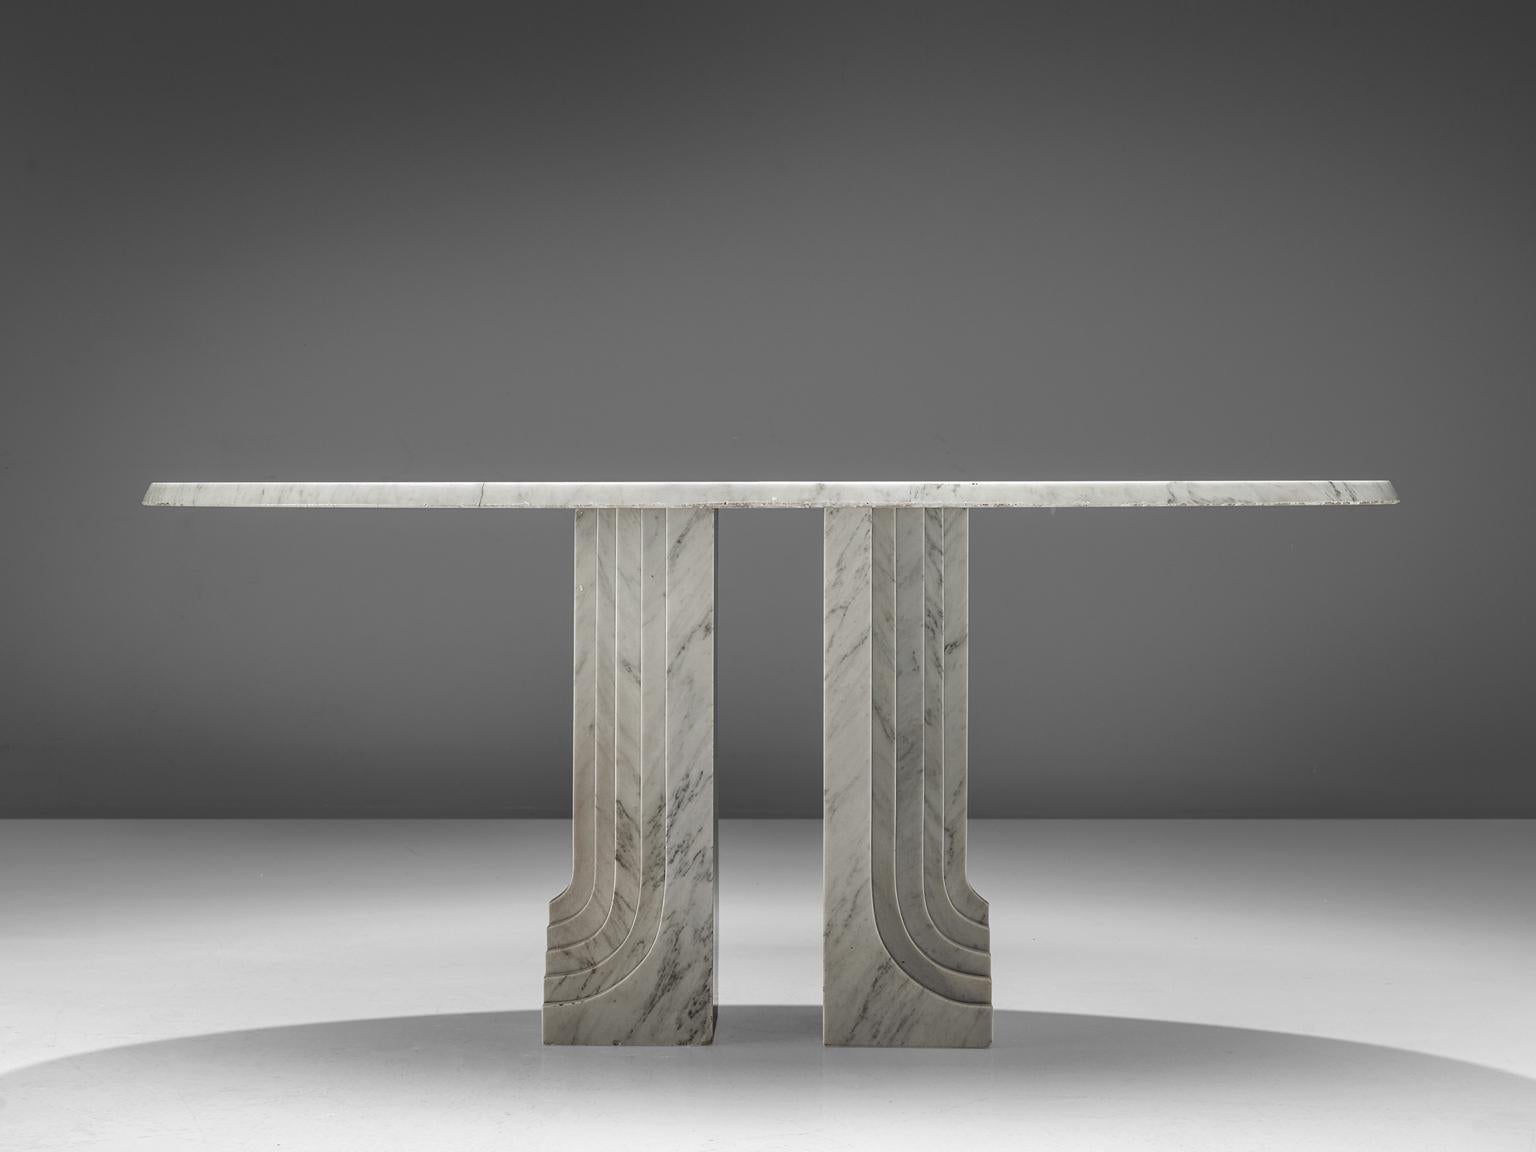 Oval marble table, Italy, 1970s.

This table is an nice example of Italian design with roman inspired architecture. The base of the table is formed out of two layered pillars that exist of several pillars in a row. The oval tabletop stretches out